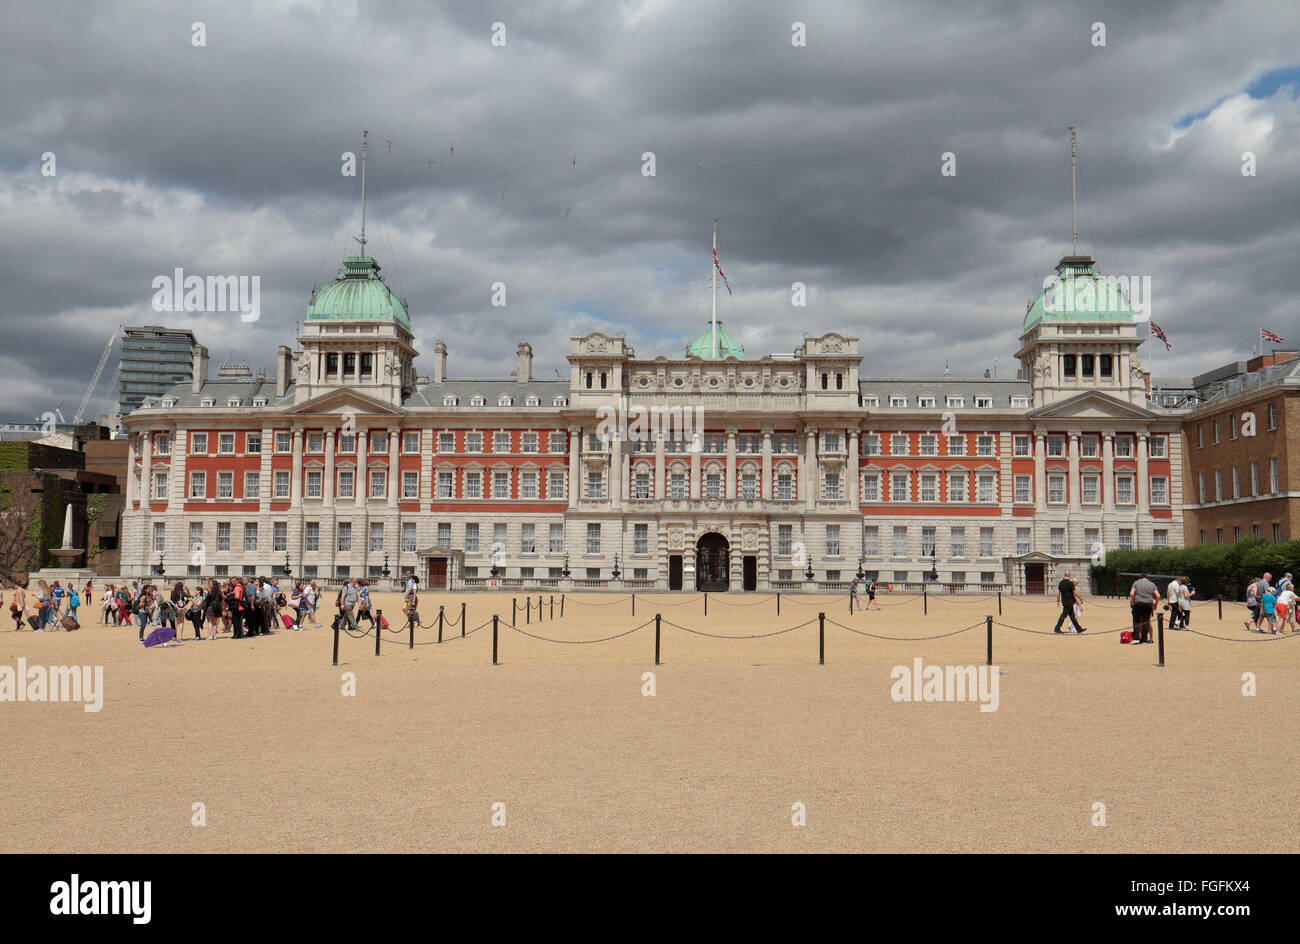 Old Admiralty Buildings on Horse Guards Parade, London, UK. Stock Photo